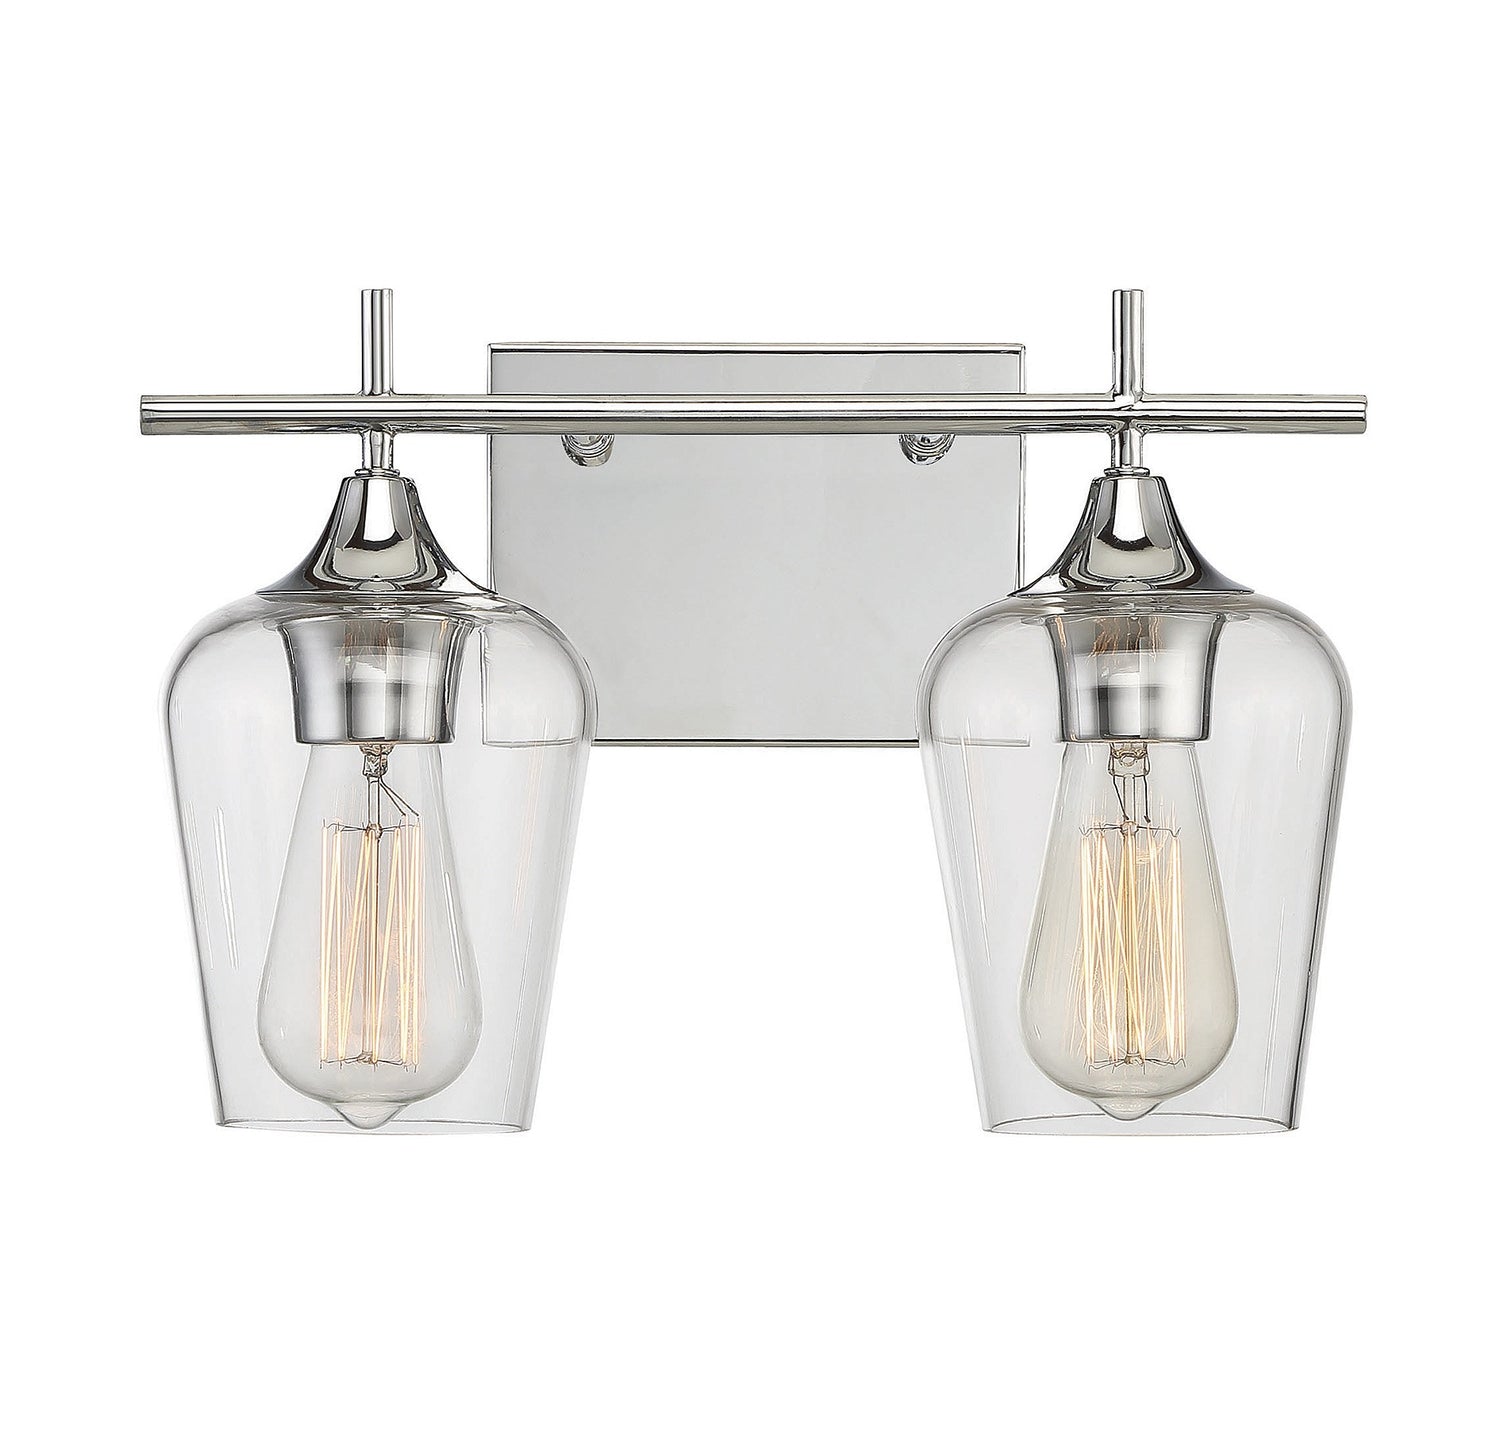 Octave 2 Light Vanity in Polished Chrome with Clear Glass Shades by Savoy House 8-4030-2-11